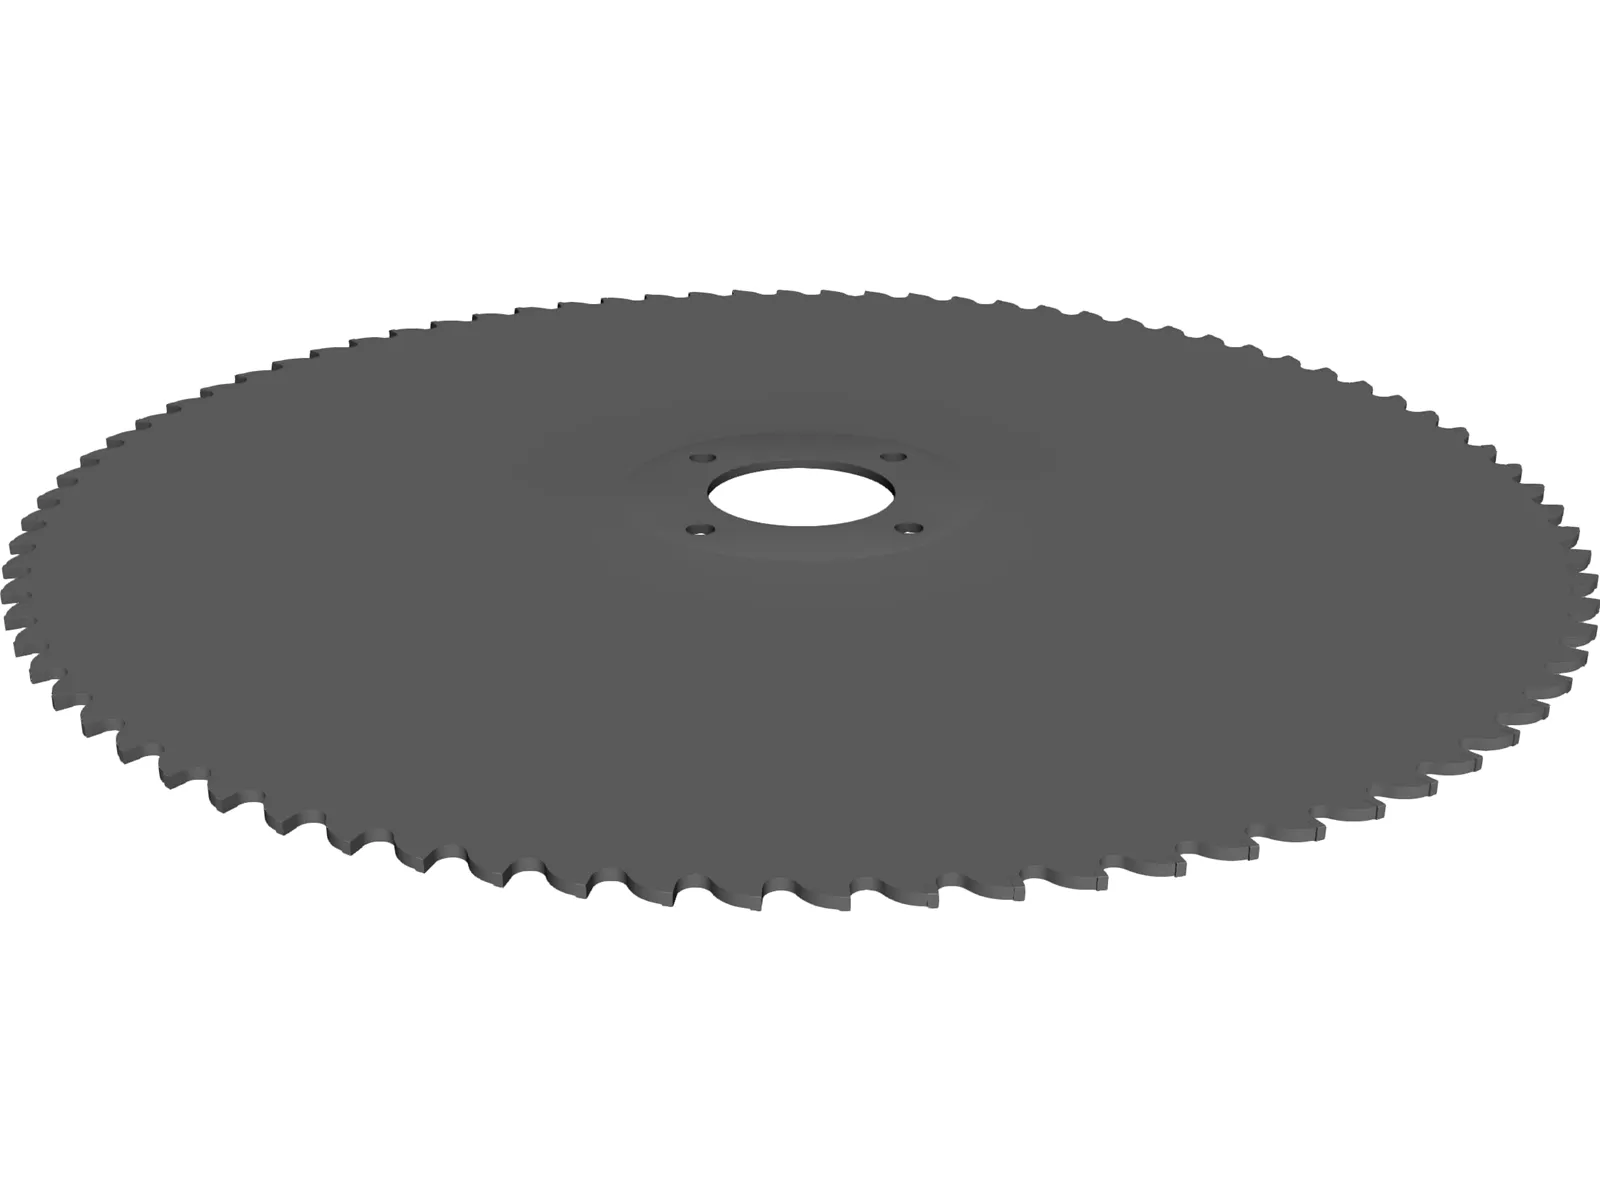 Table Saw Blade 10 inch 3D Model